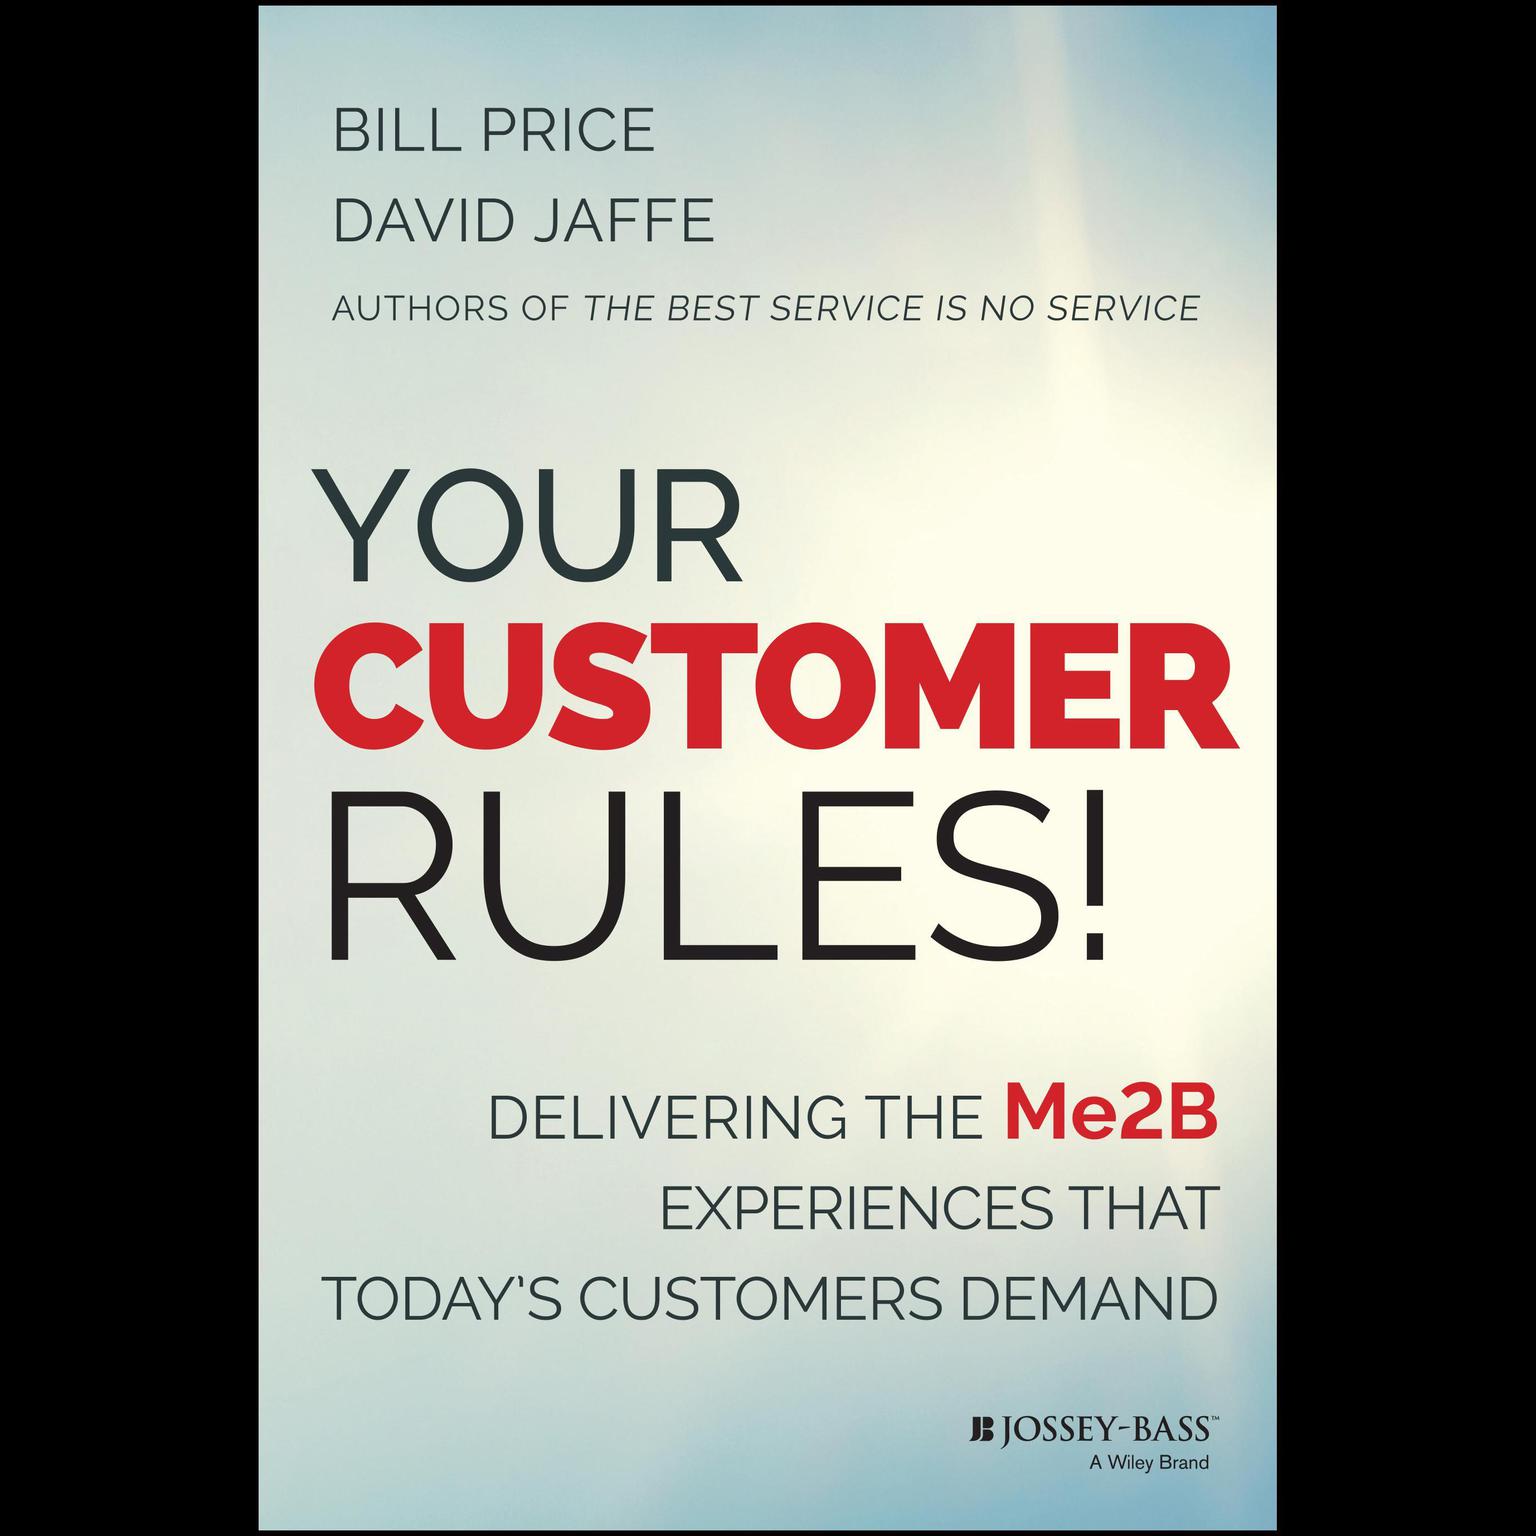 Your Customer Rules!: Delivering the Me2B Experiences That Todays Customers Demand Audiobook, by Bill Price